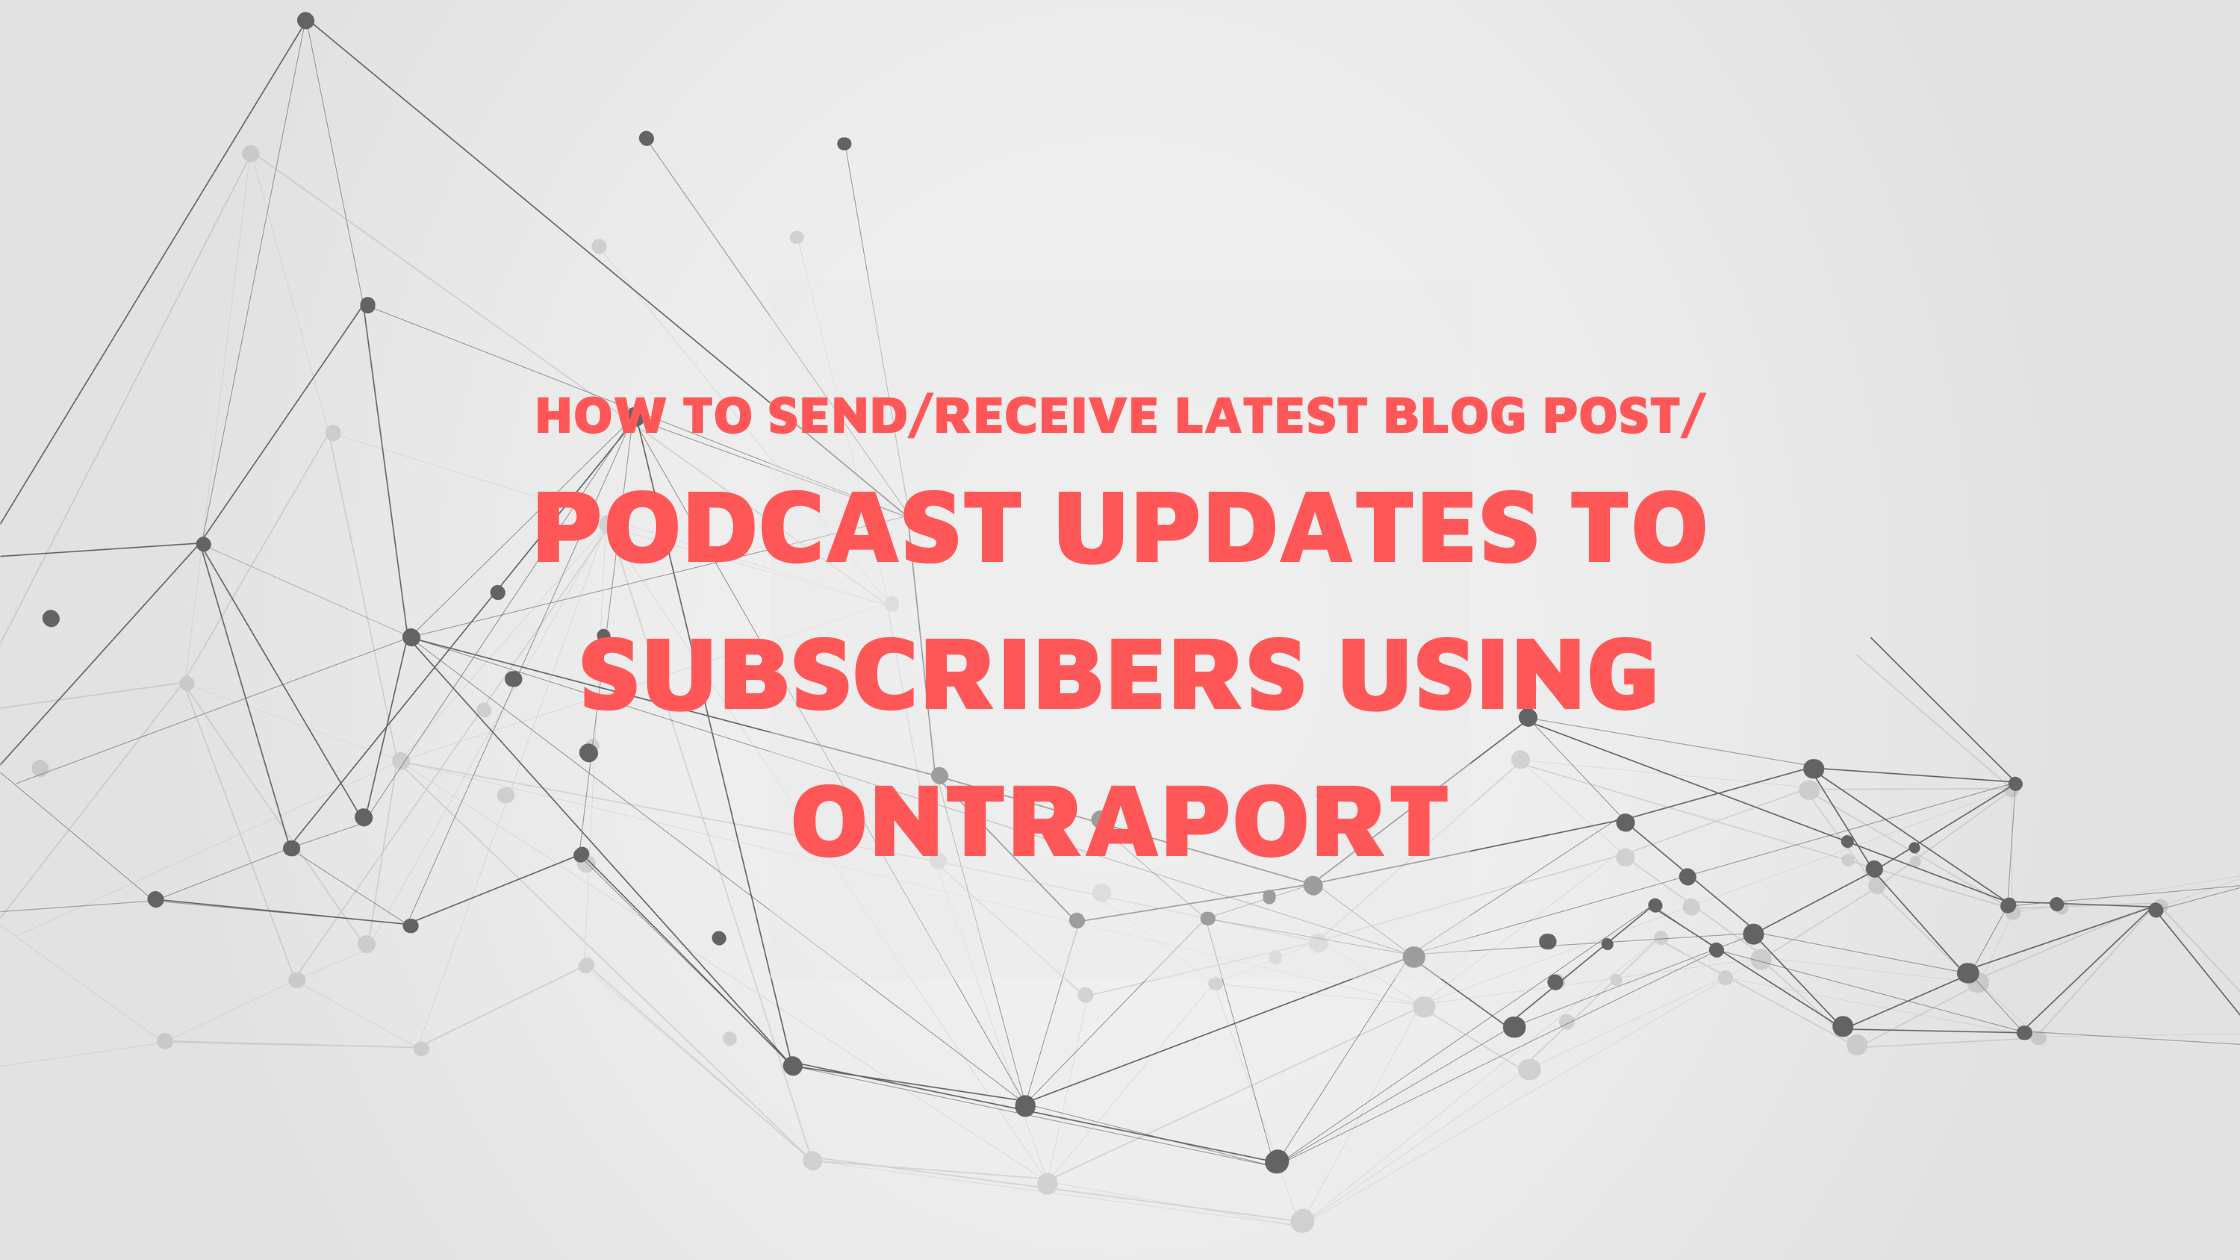 How to send latest blog postpodcast updates to subscribers using Ontraport